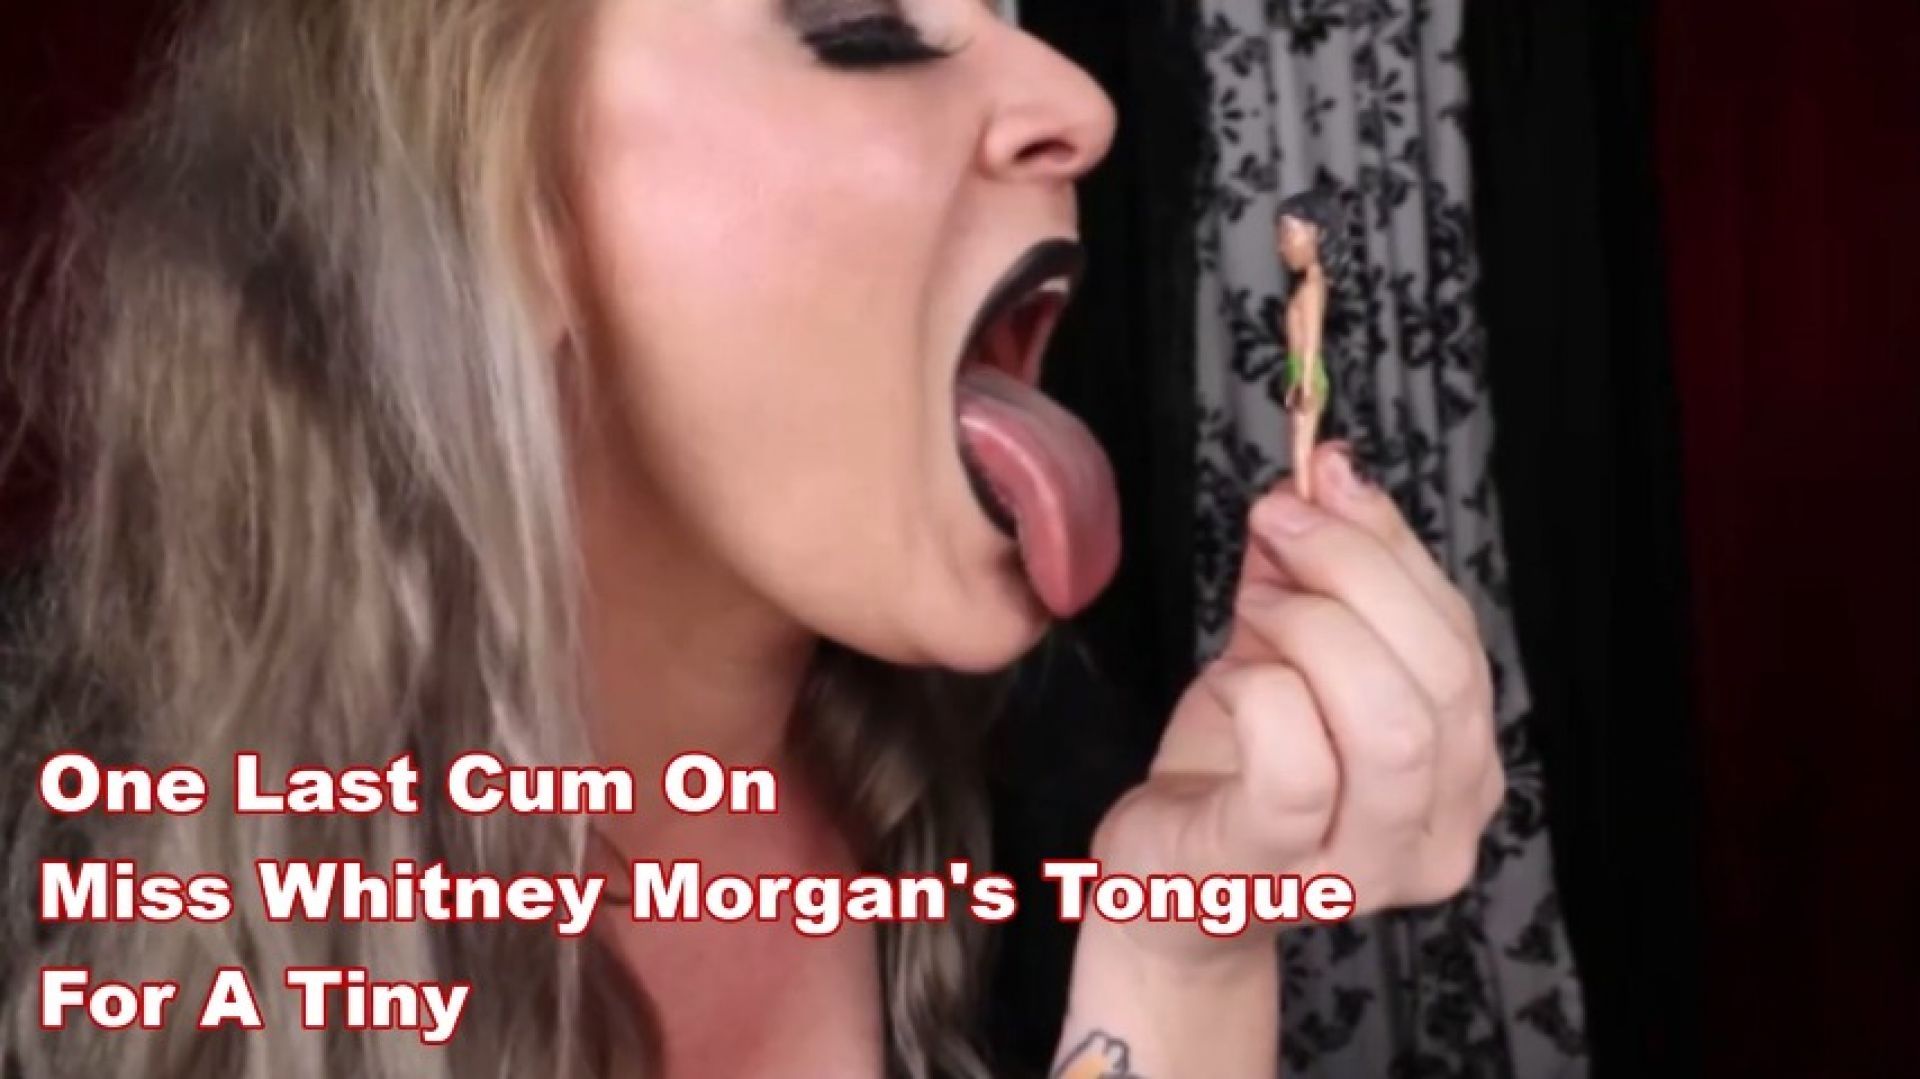 One Last Cum On Tongue For Tiny Vore